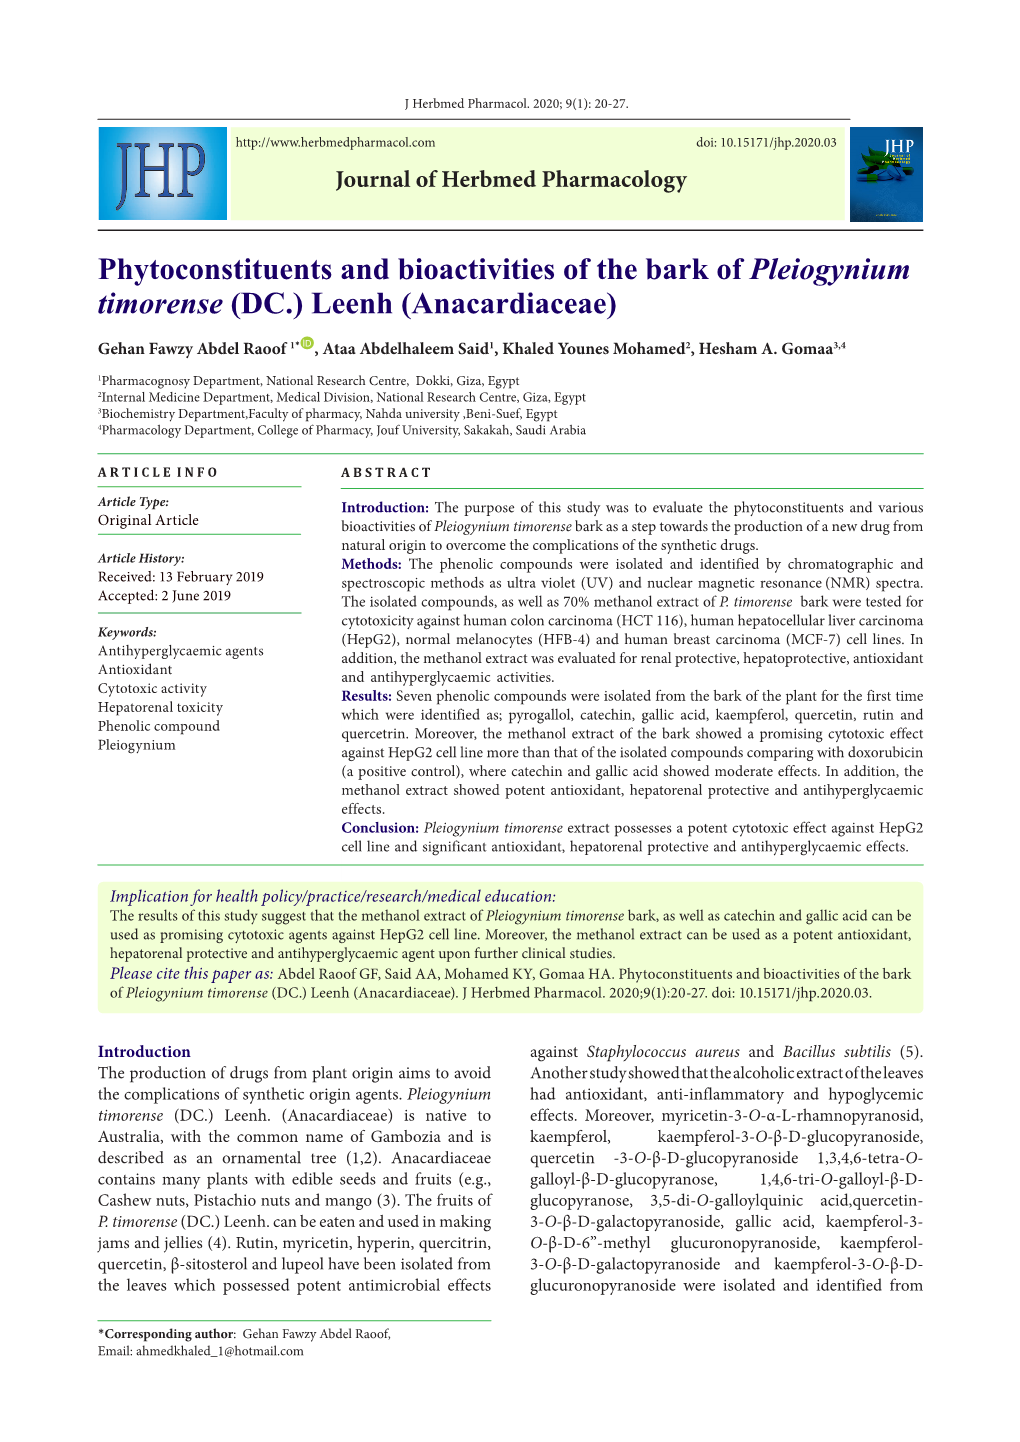 Phytoconstituents and Bioactivities of the Bark of Pleiogynium Timorense (DC.) Leenh (Anacardiaceae)